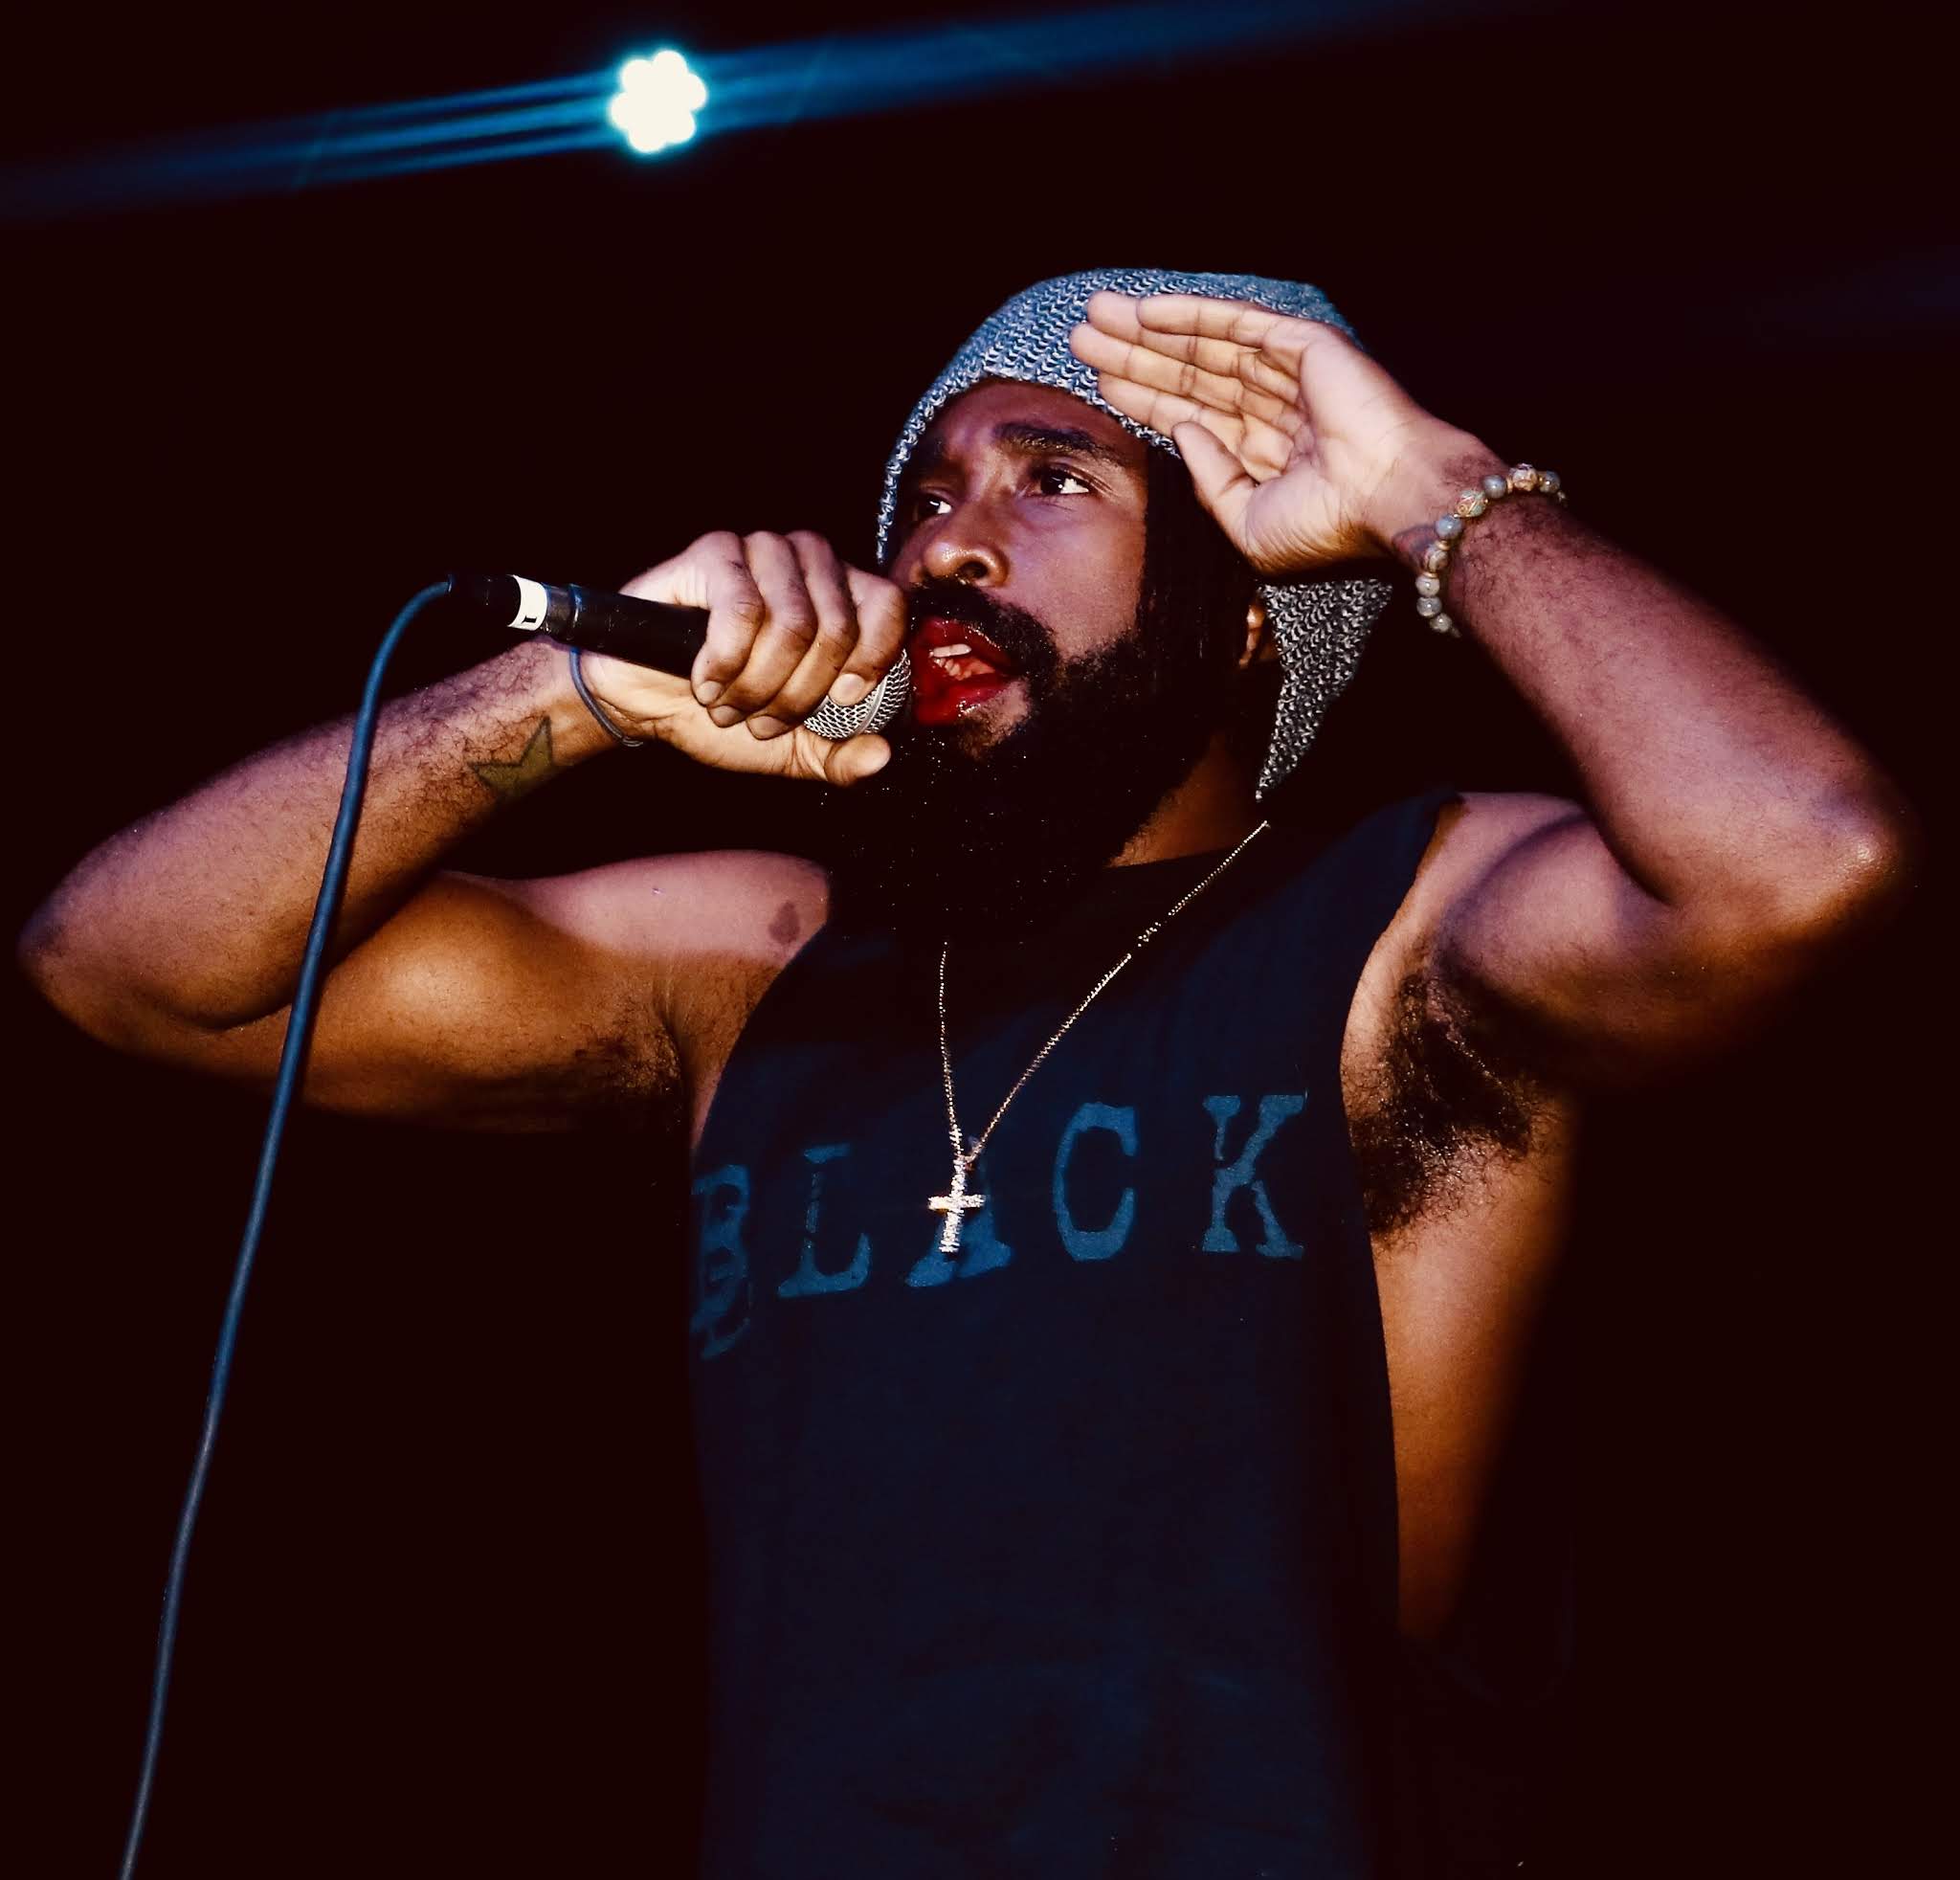 Music Audition. Discover Hip Hop music, stream free and download songs & albums, watch music videos and explore South Carolina's independent/emerging music scene with Joshua.